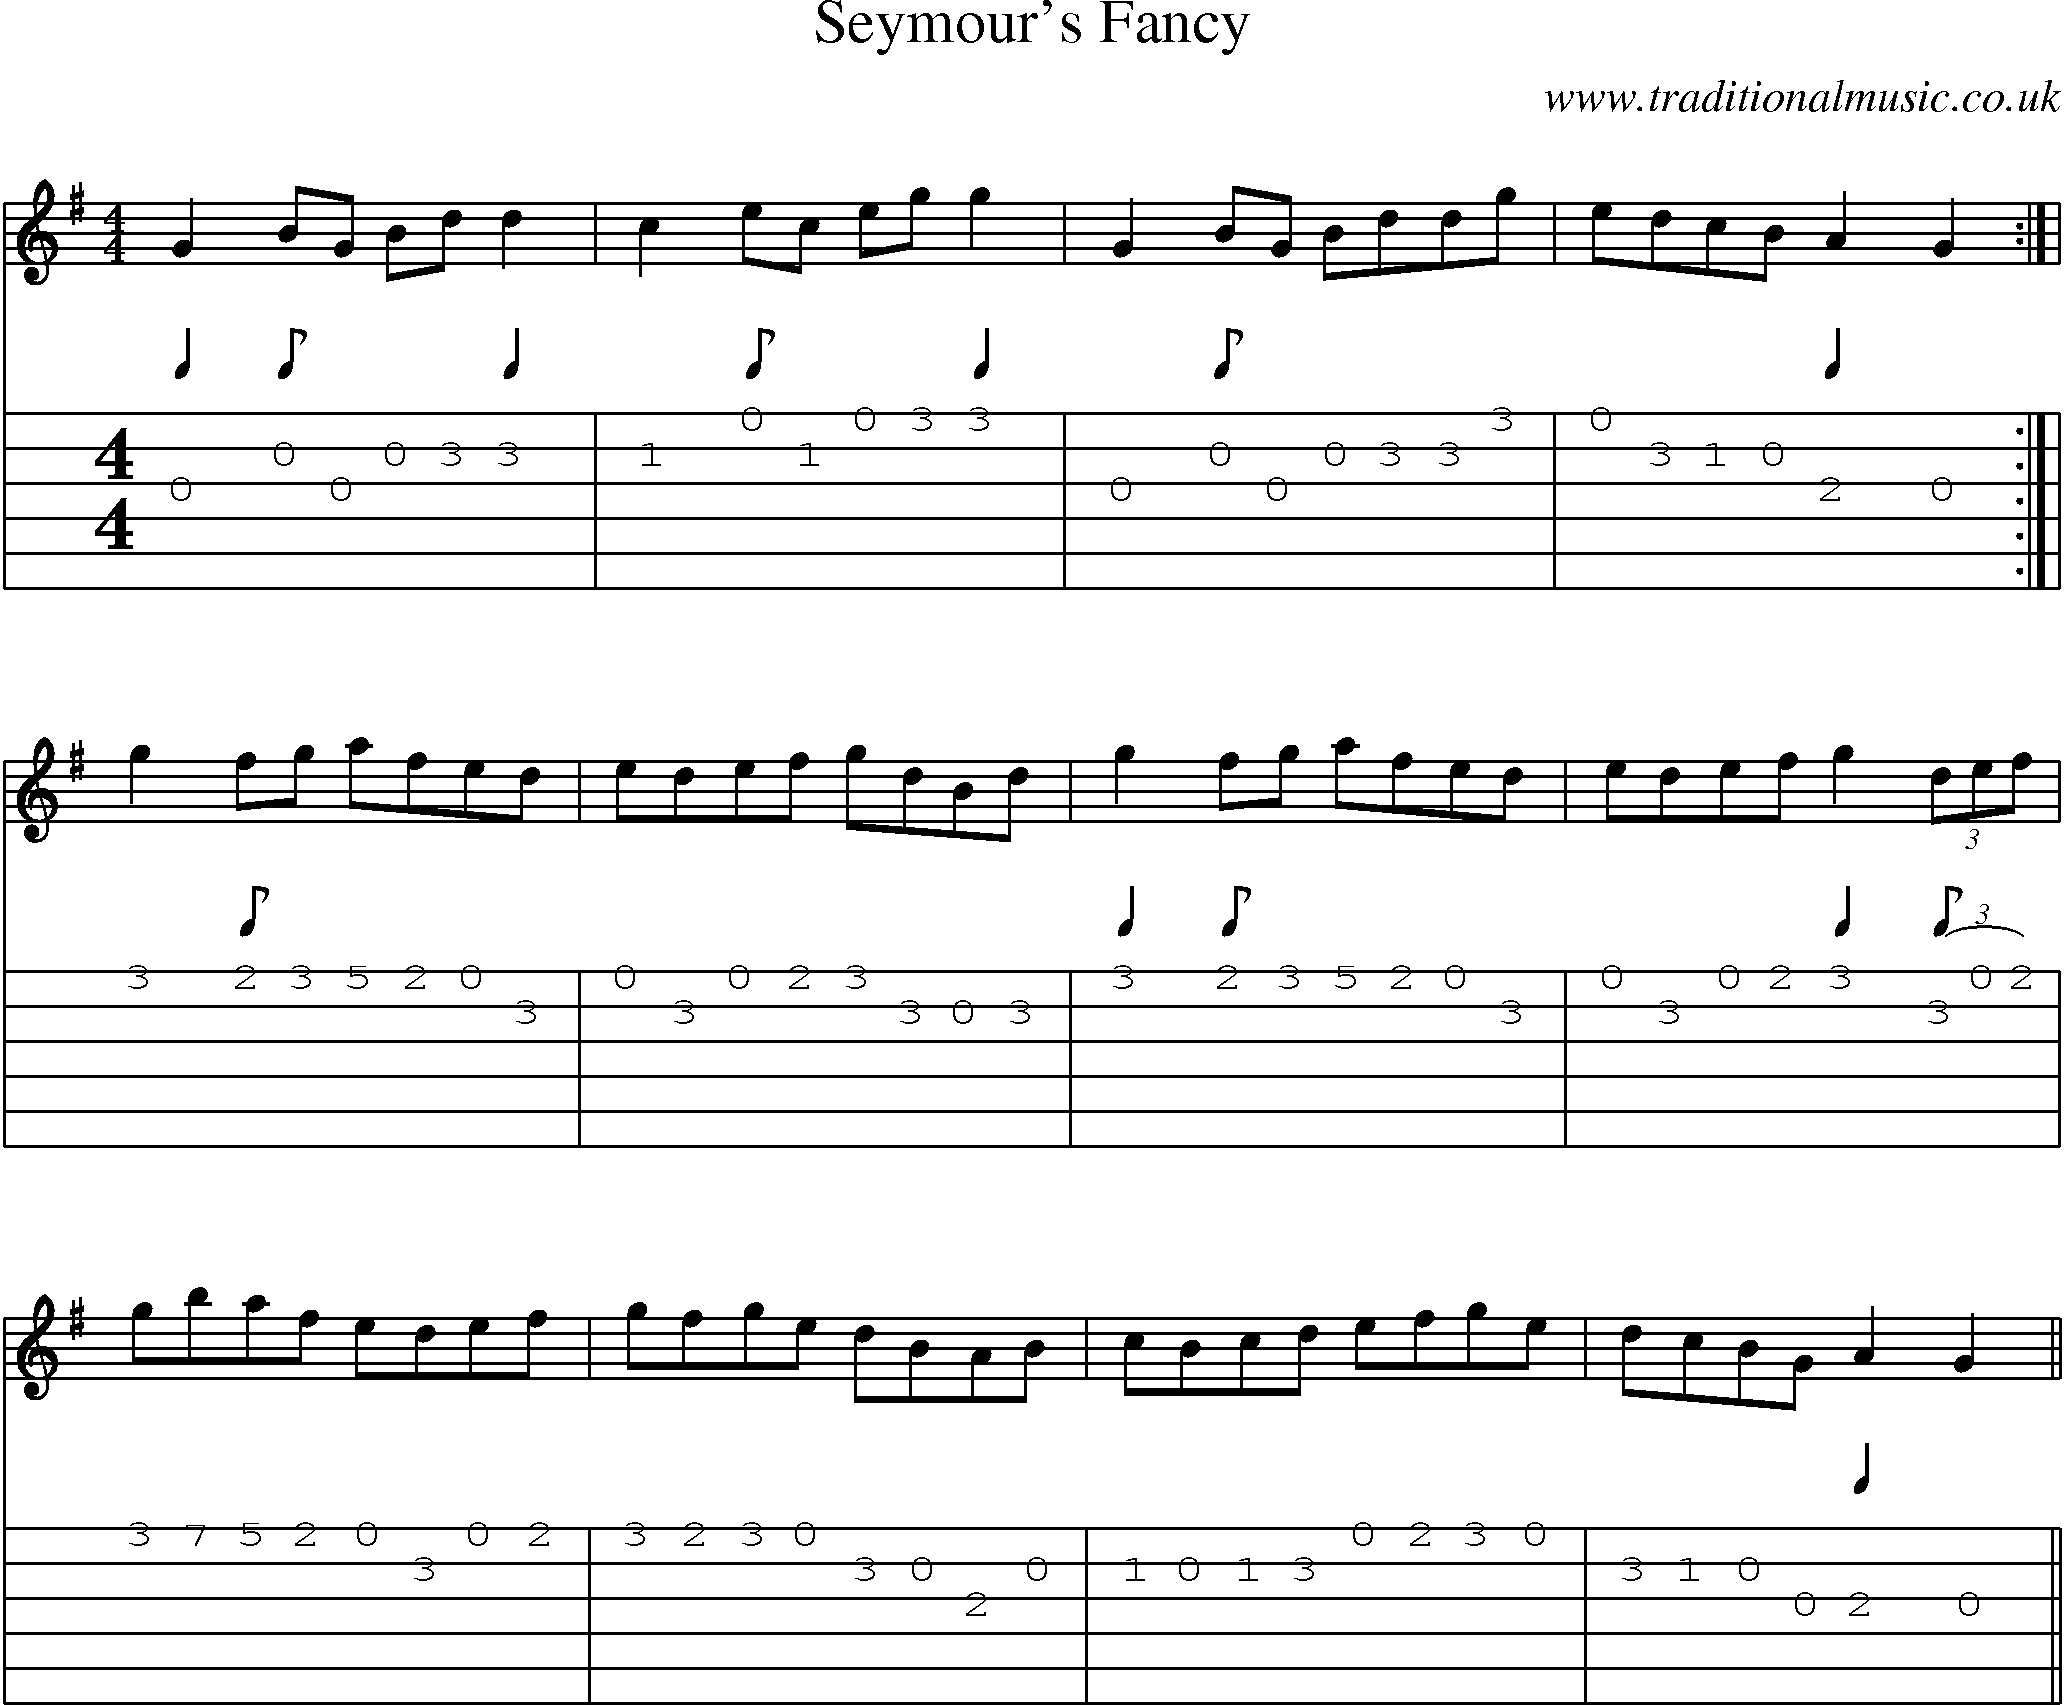 Music Score and Guitar Tabs for Seymours Fancy